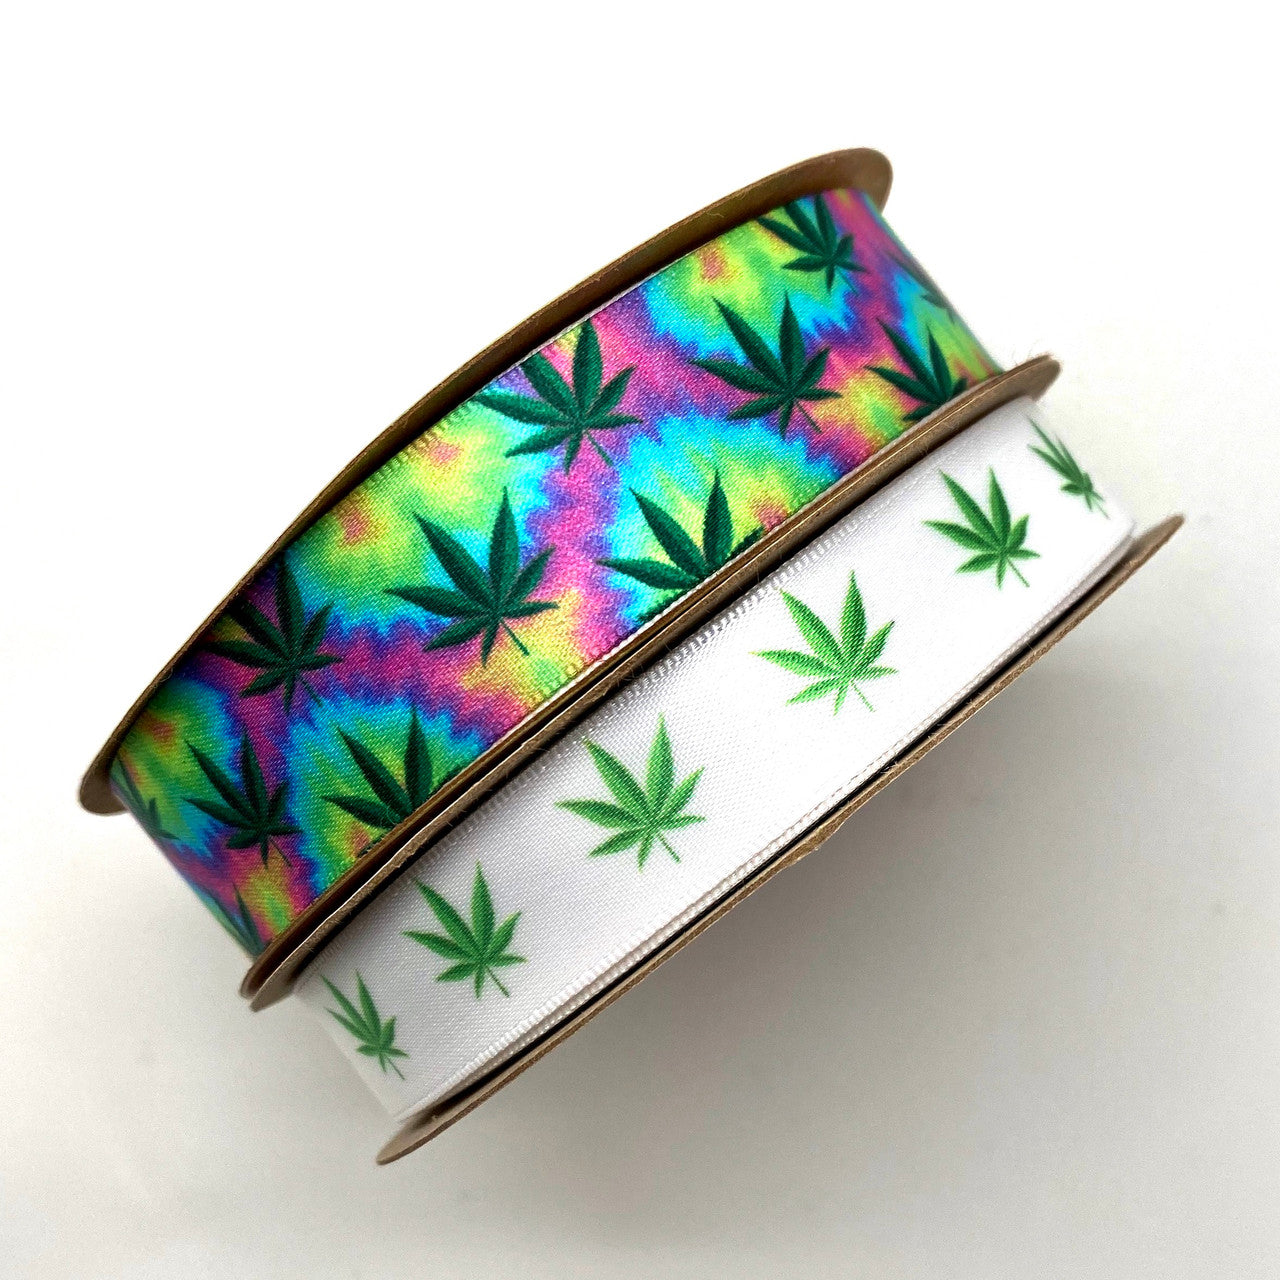 We love to mix and match our ribbons! Pair our 7/8" tie dye print with cannabis leaves with our 5/8" marijuana leaves for some fun packaging!